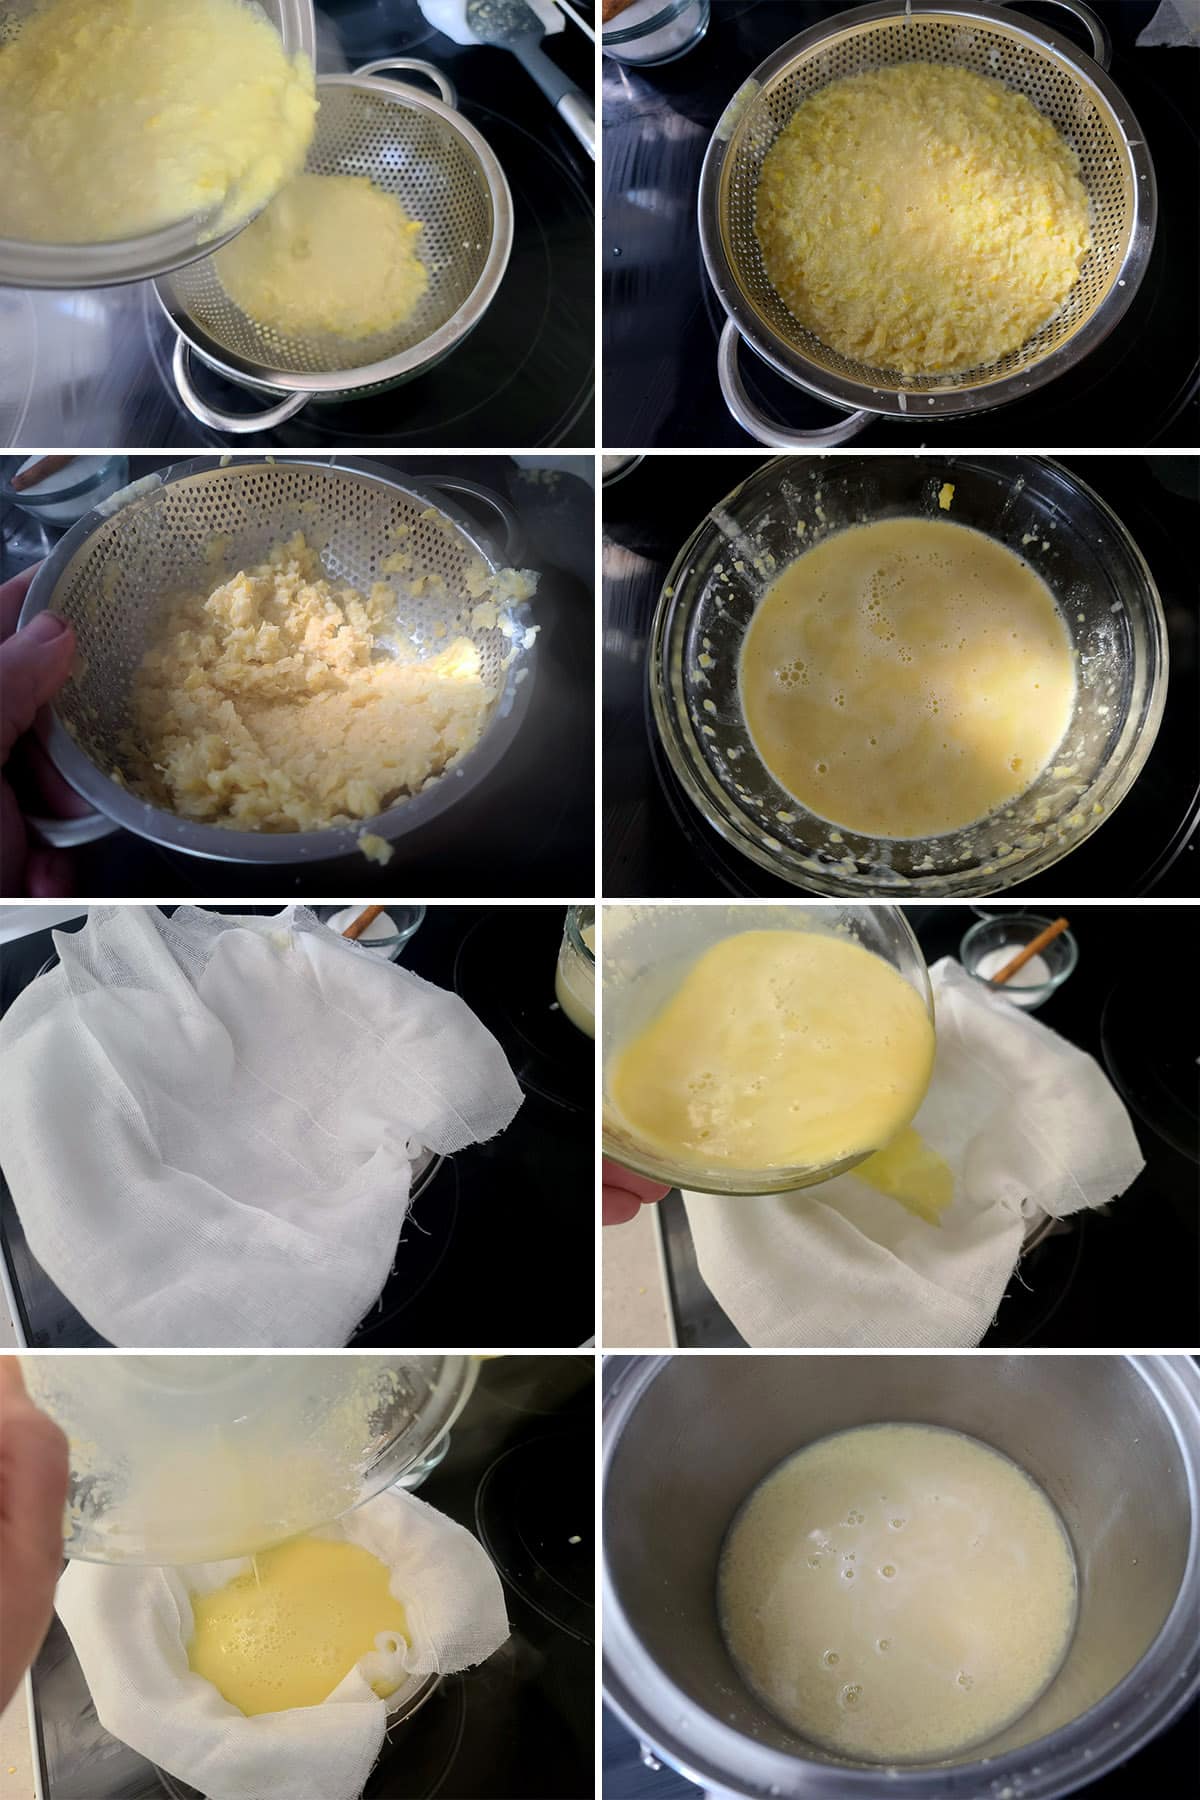 An 8 part image showing the corn mush being strained twice, as described.